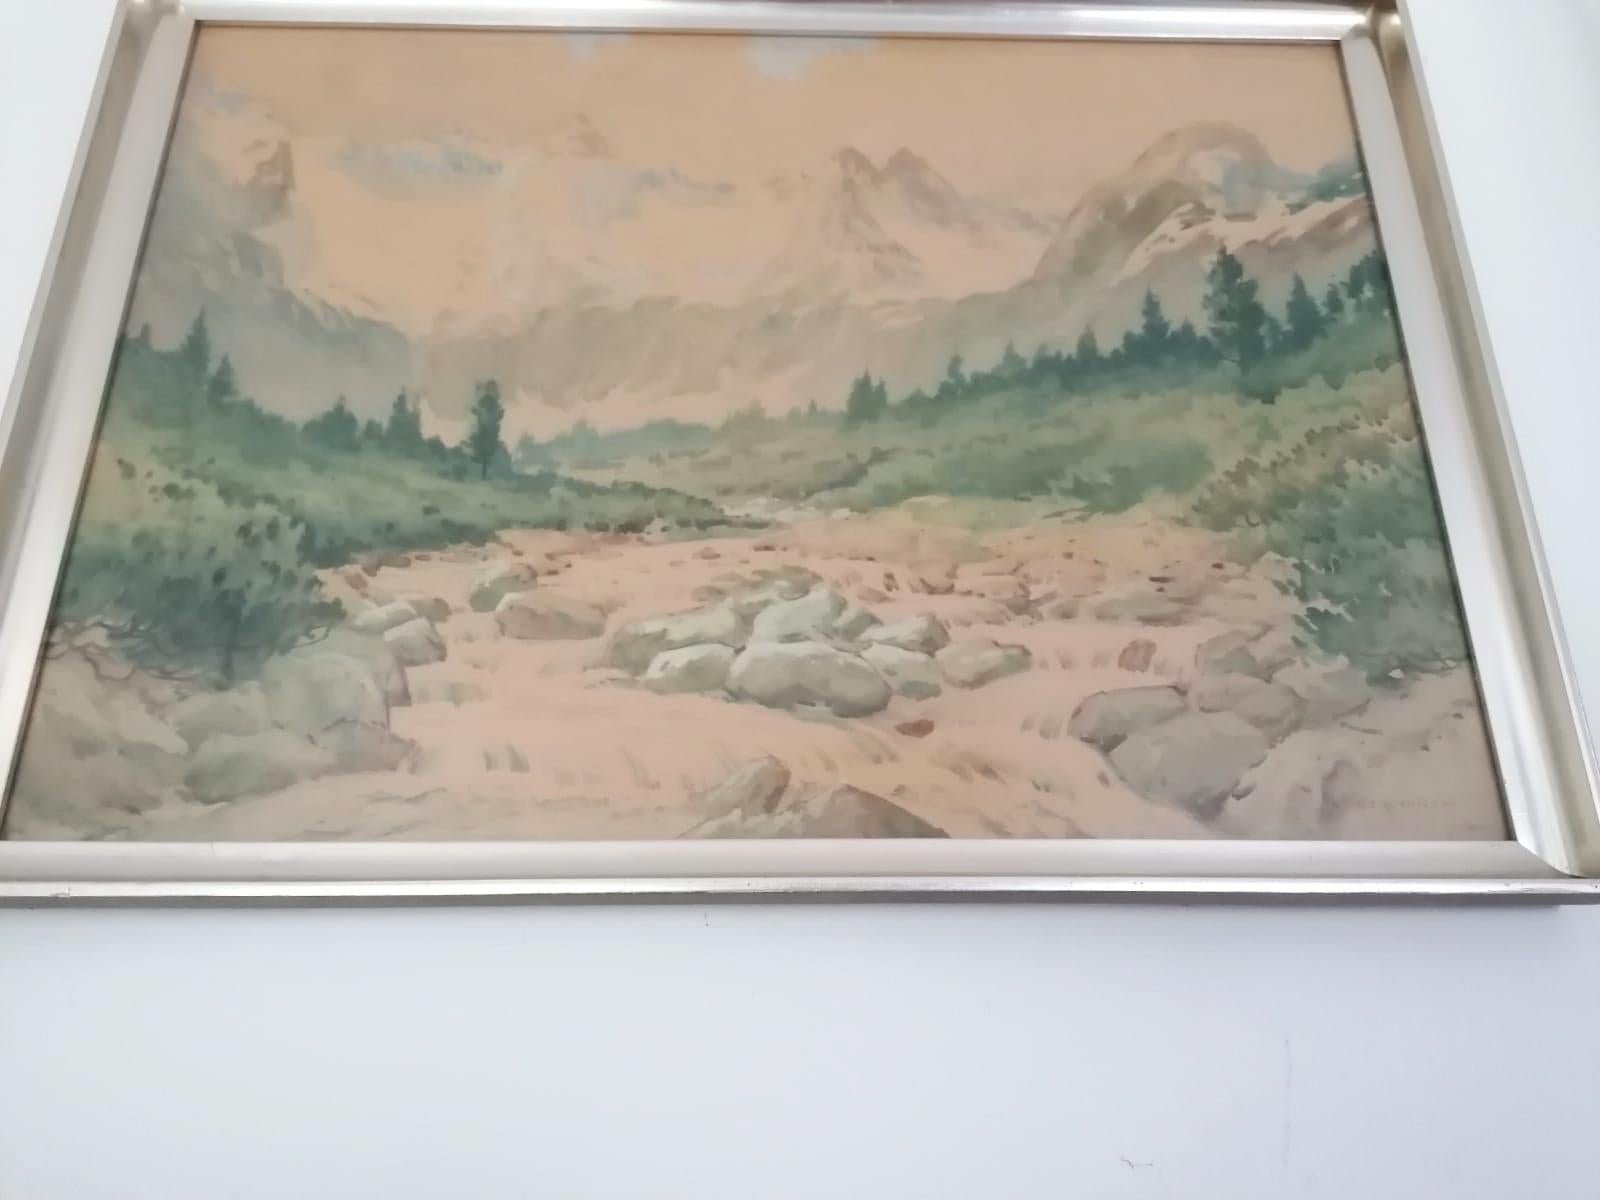 Stanislaw Dziemanski (1897-1962)
Tatra mountain landscape, painted in the early 1930s
watercolor/paper, measures: 69 x 48 cm
signed lower right: 'ST. DZIEMANSKI
Good original condition.